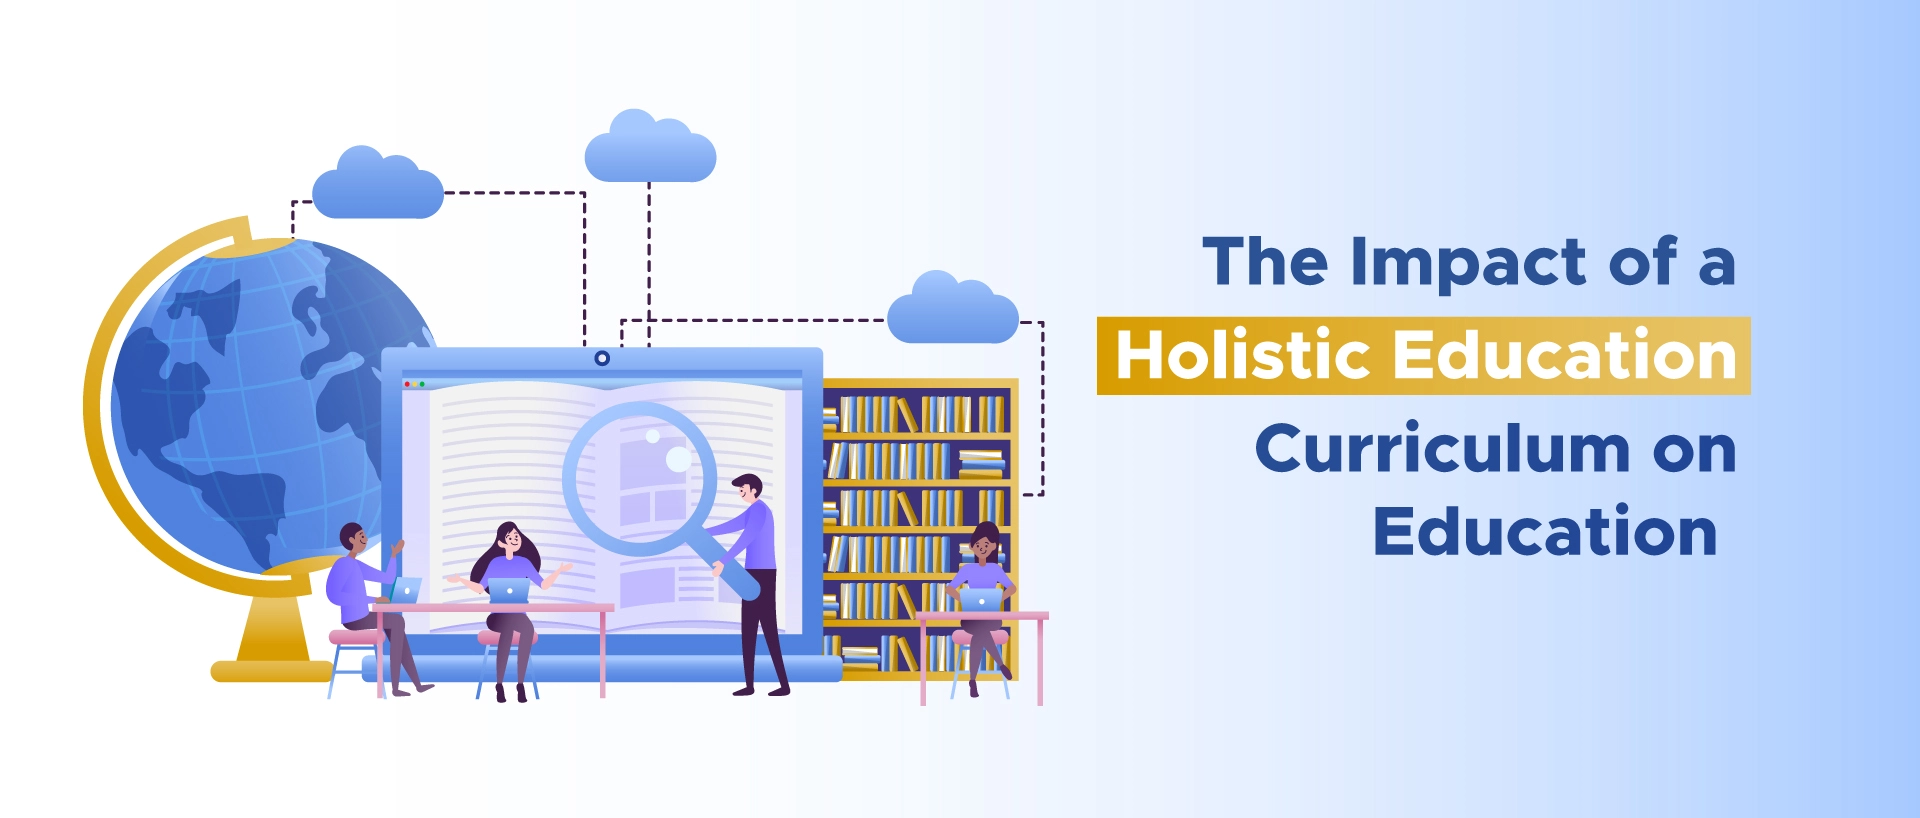 Introduction to Holistic Education & Its Impact